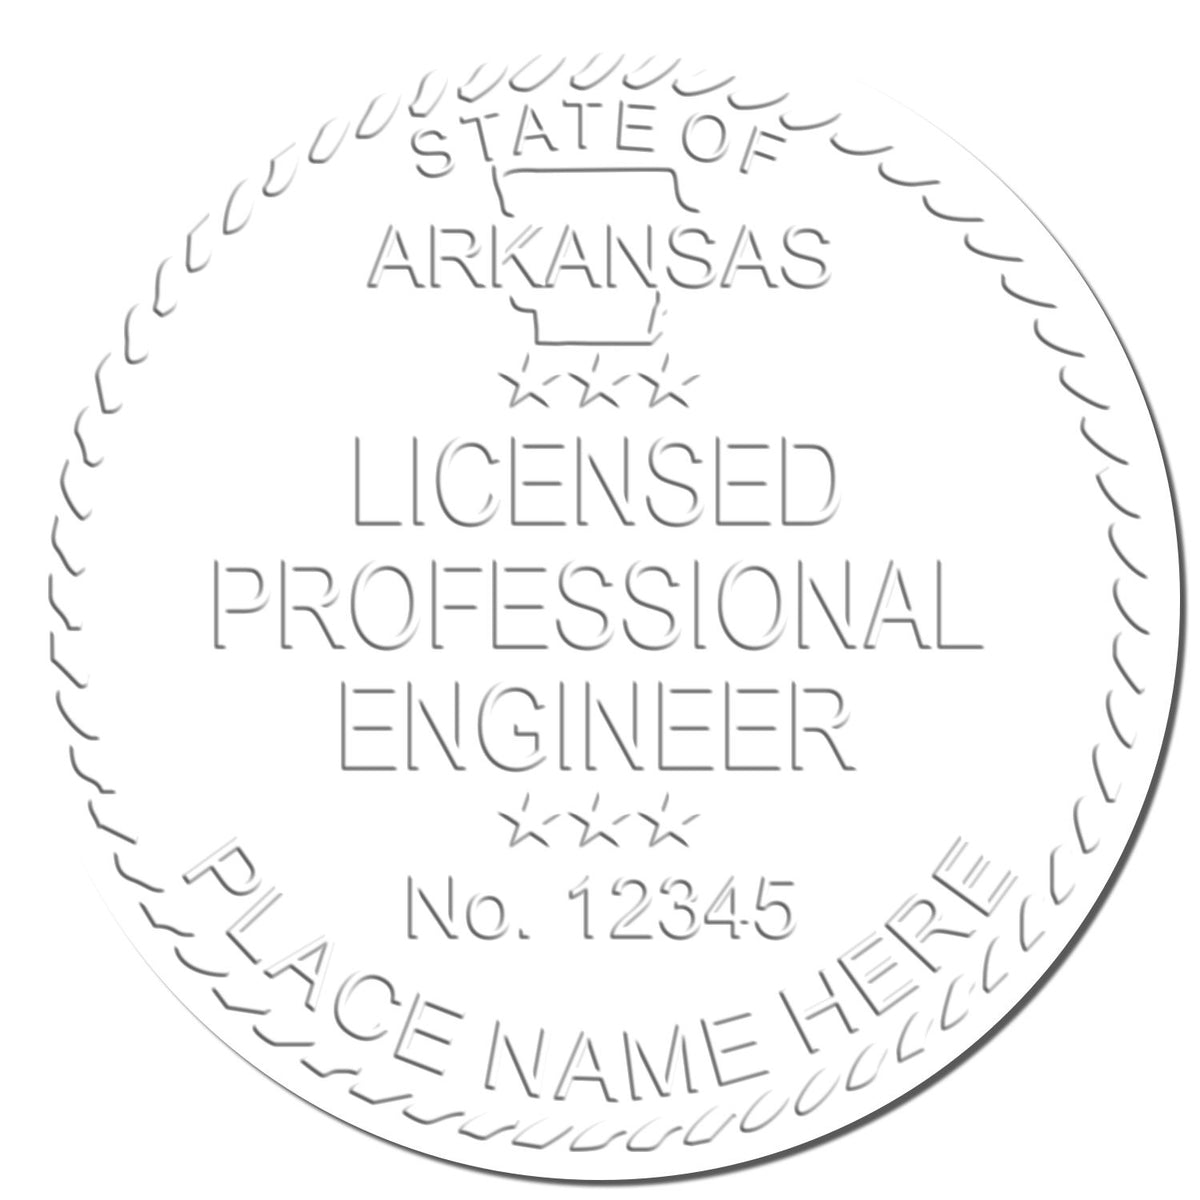 This paper is stamped with a sample imprint of the Gift Arkansas Engineer Seal, signifying its quality and reliability.